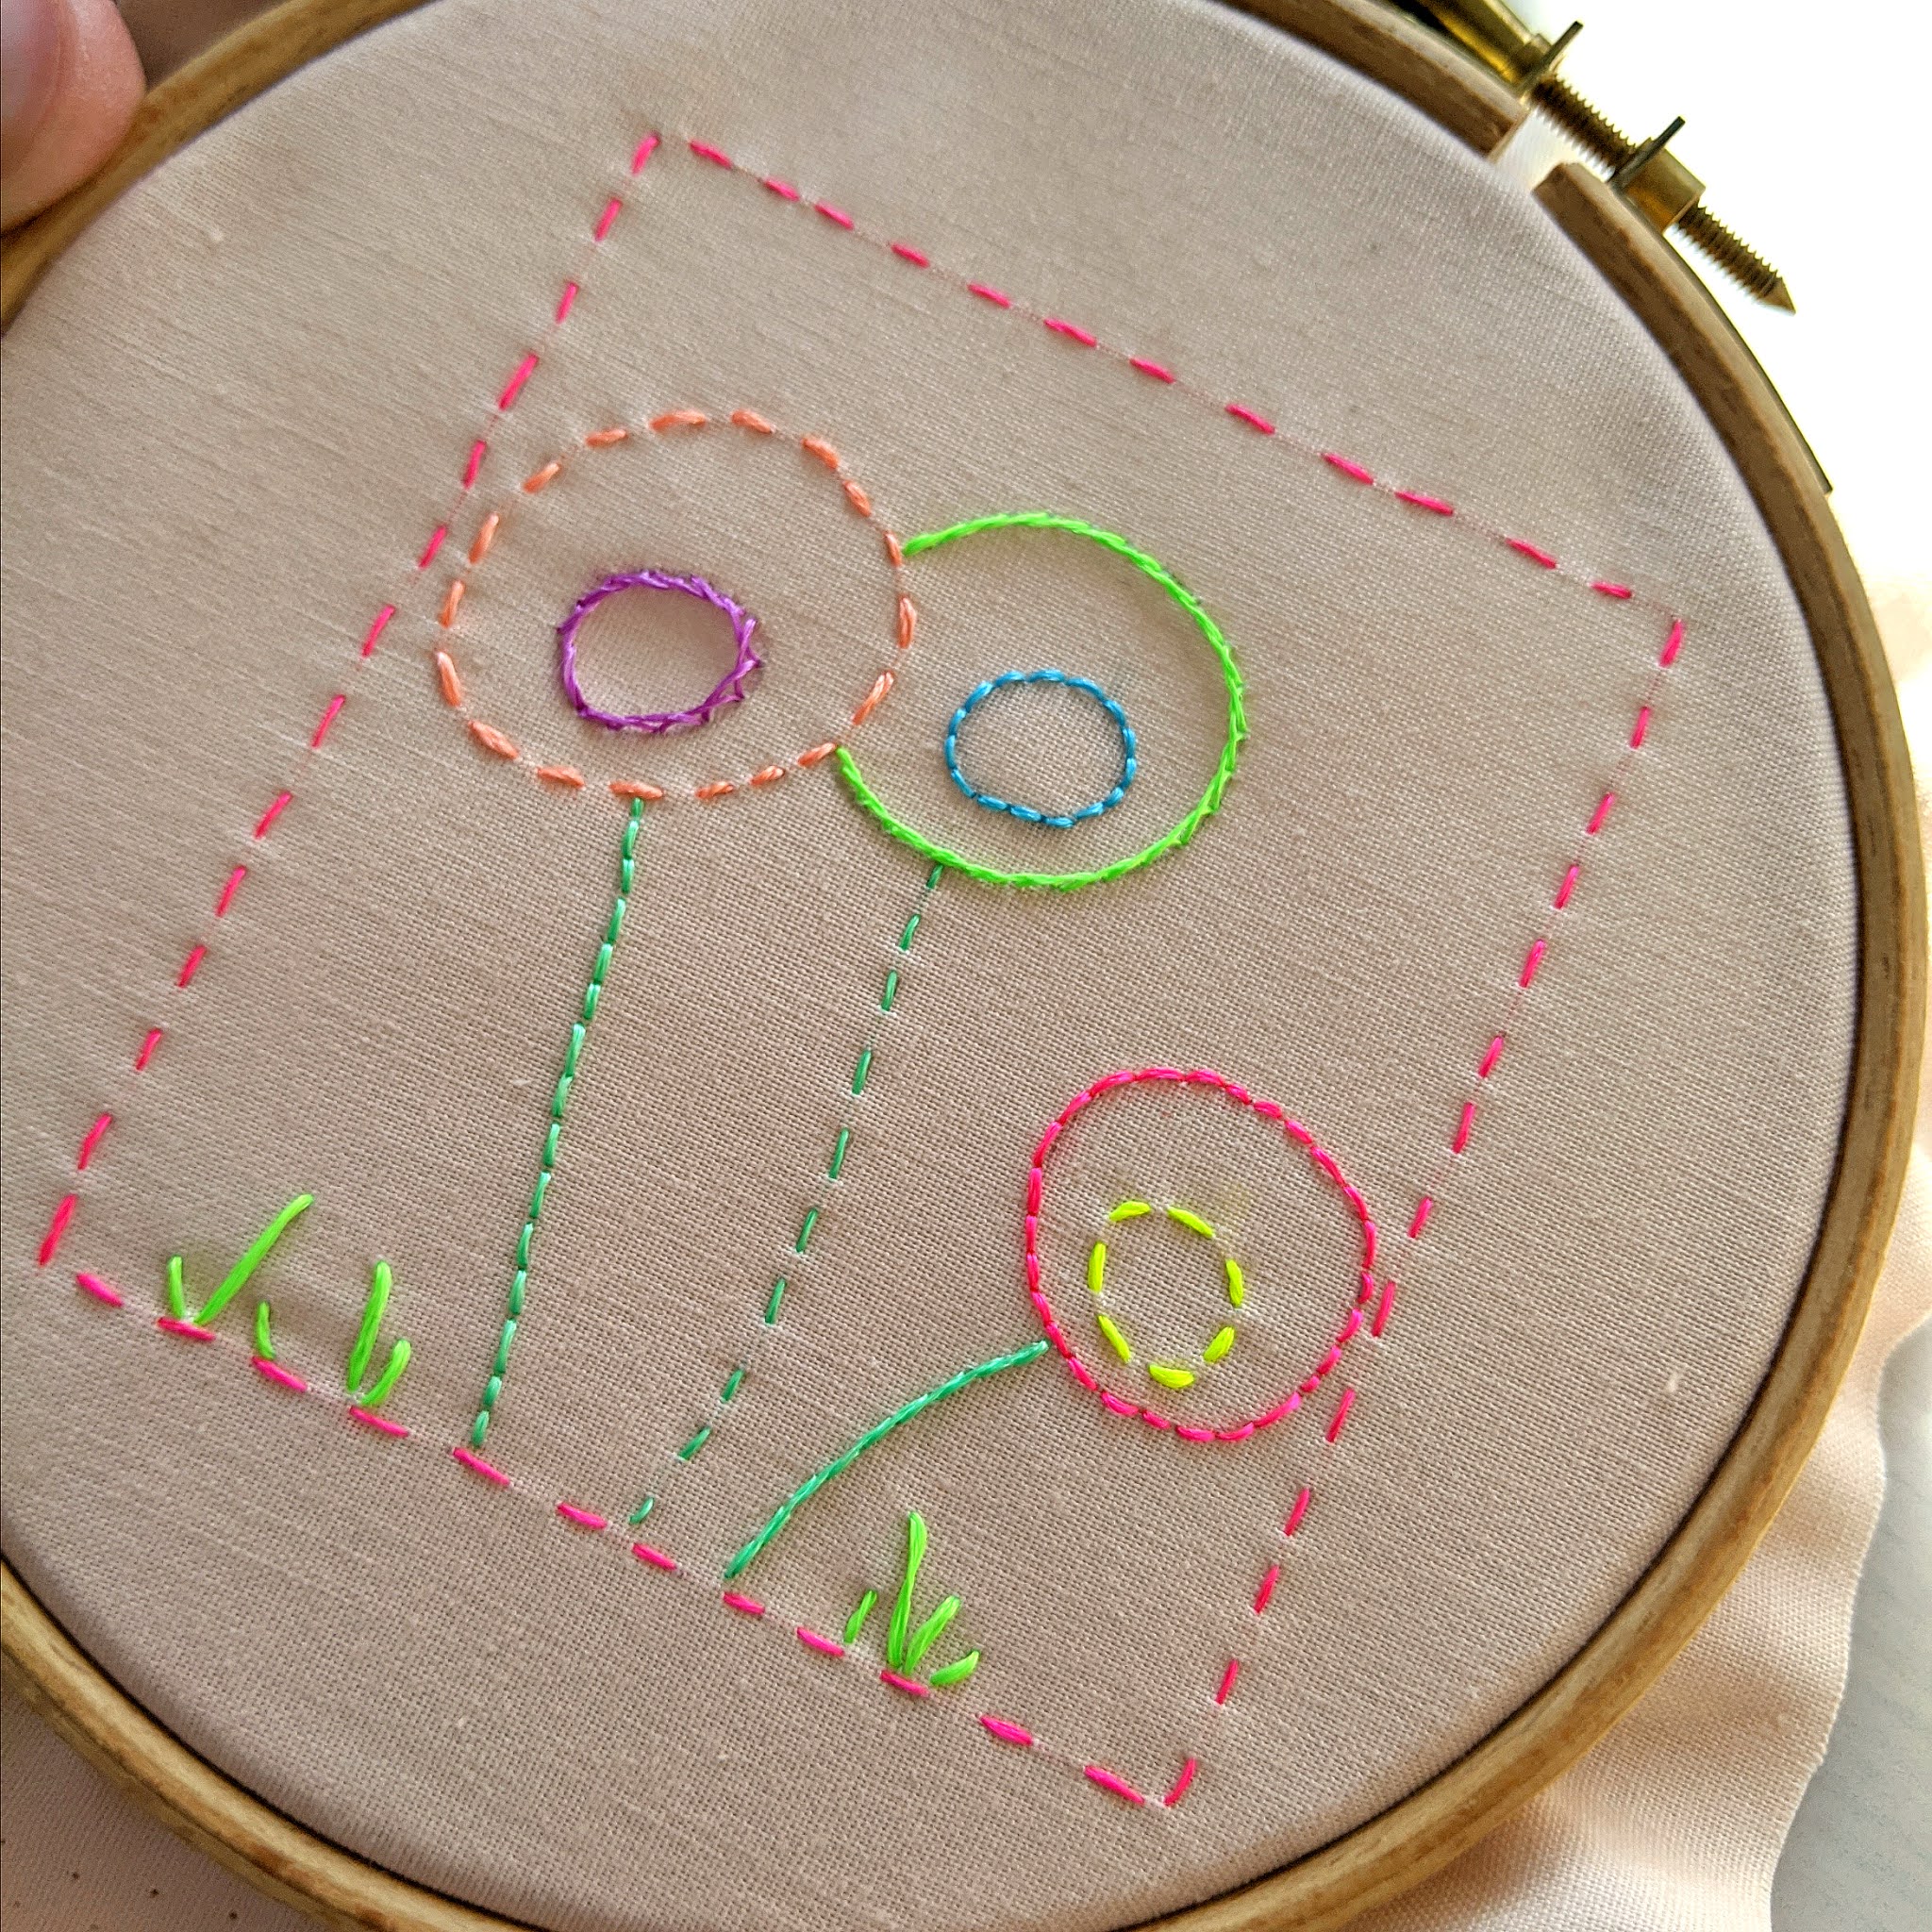 Set 5 Embroidery hoops 12 inch